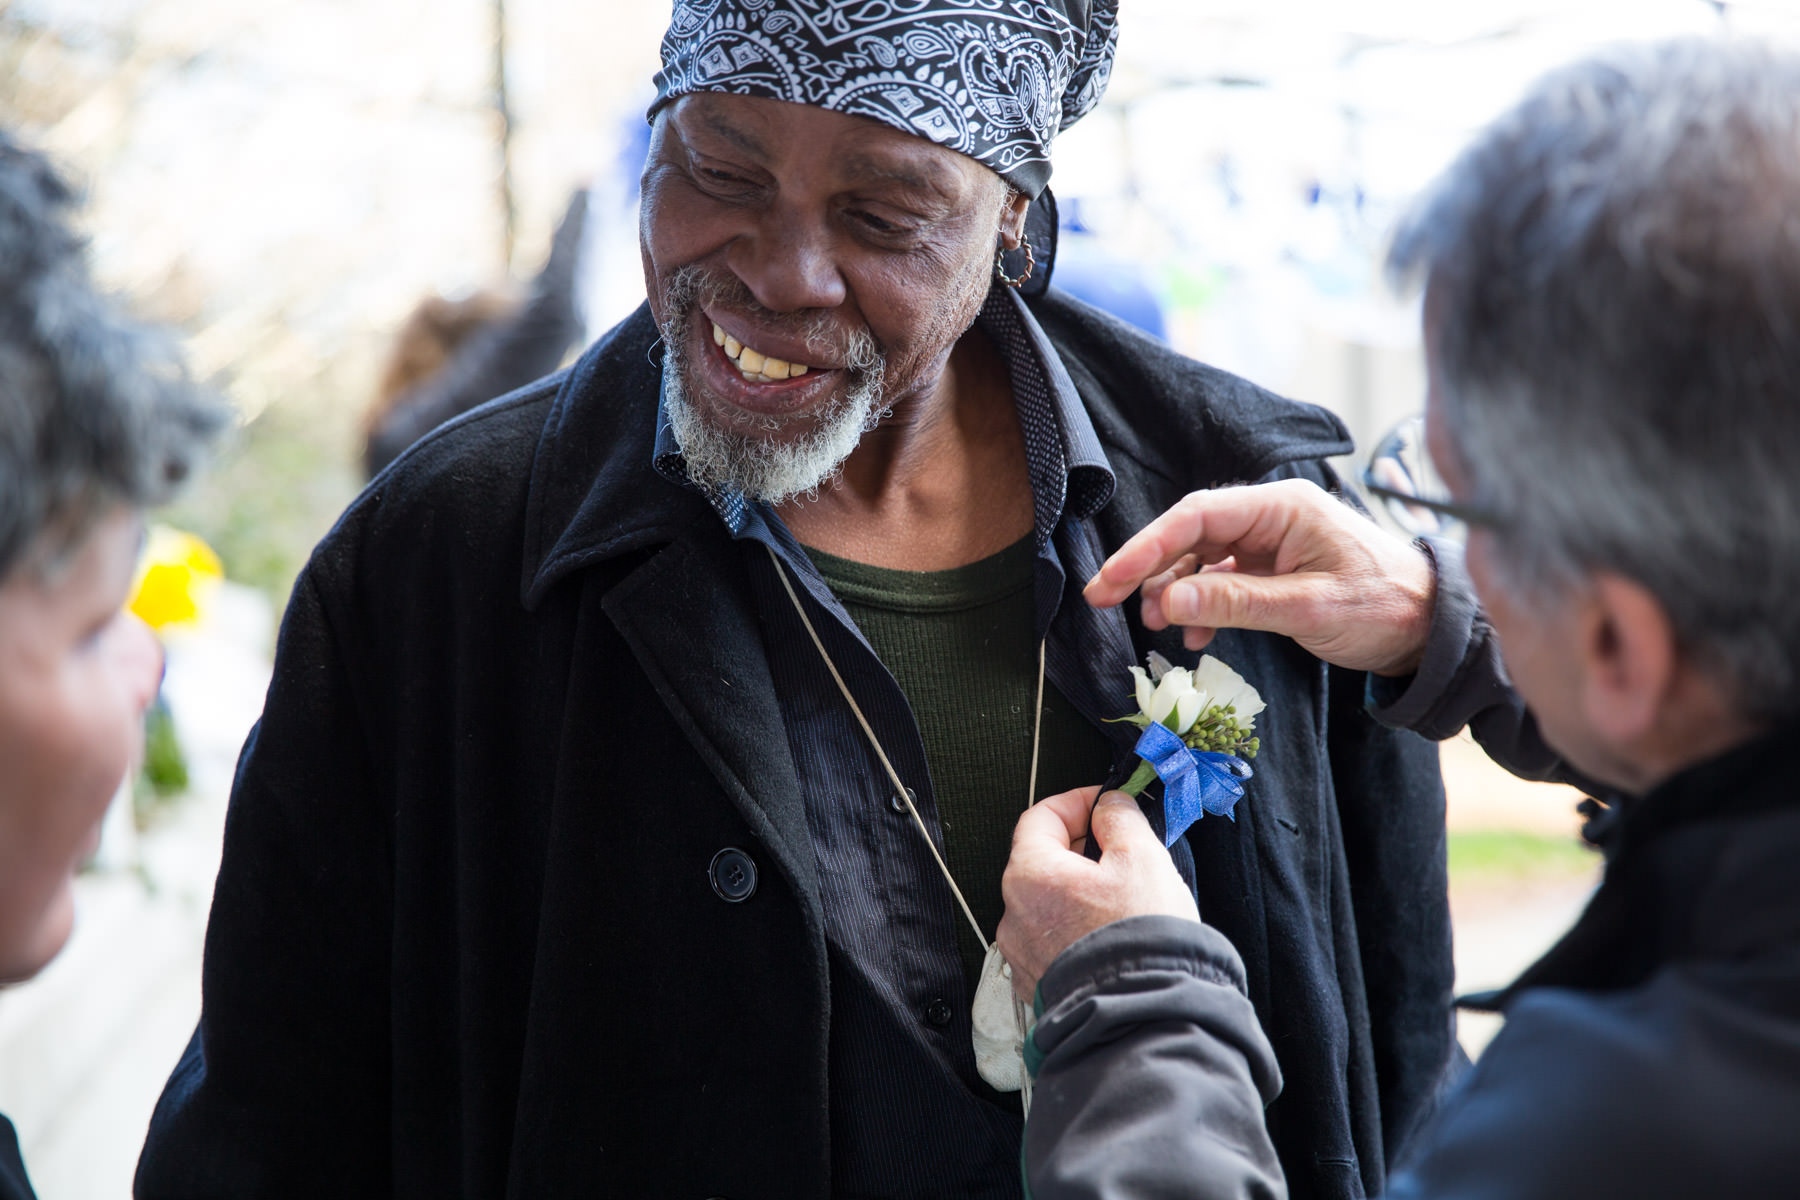 Homeless Vows | NY Times - A boutonniere for the groom.  For the New York Times 